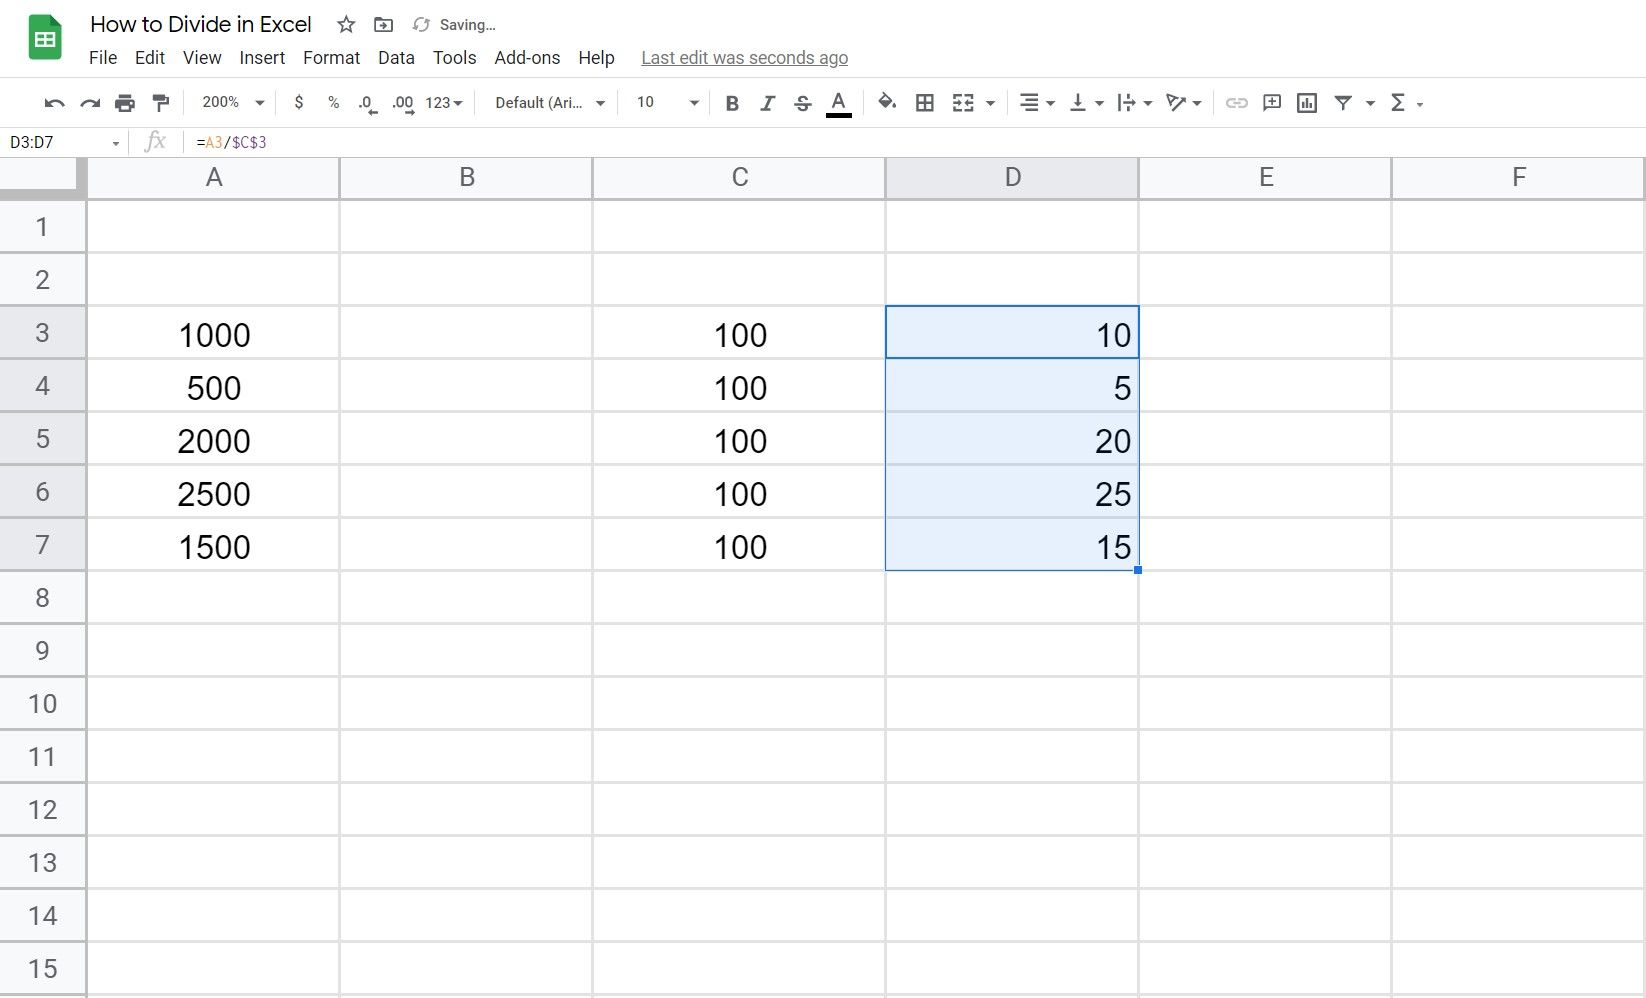 - Come dividere in Excel